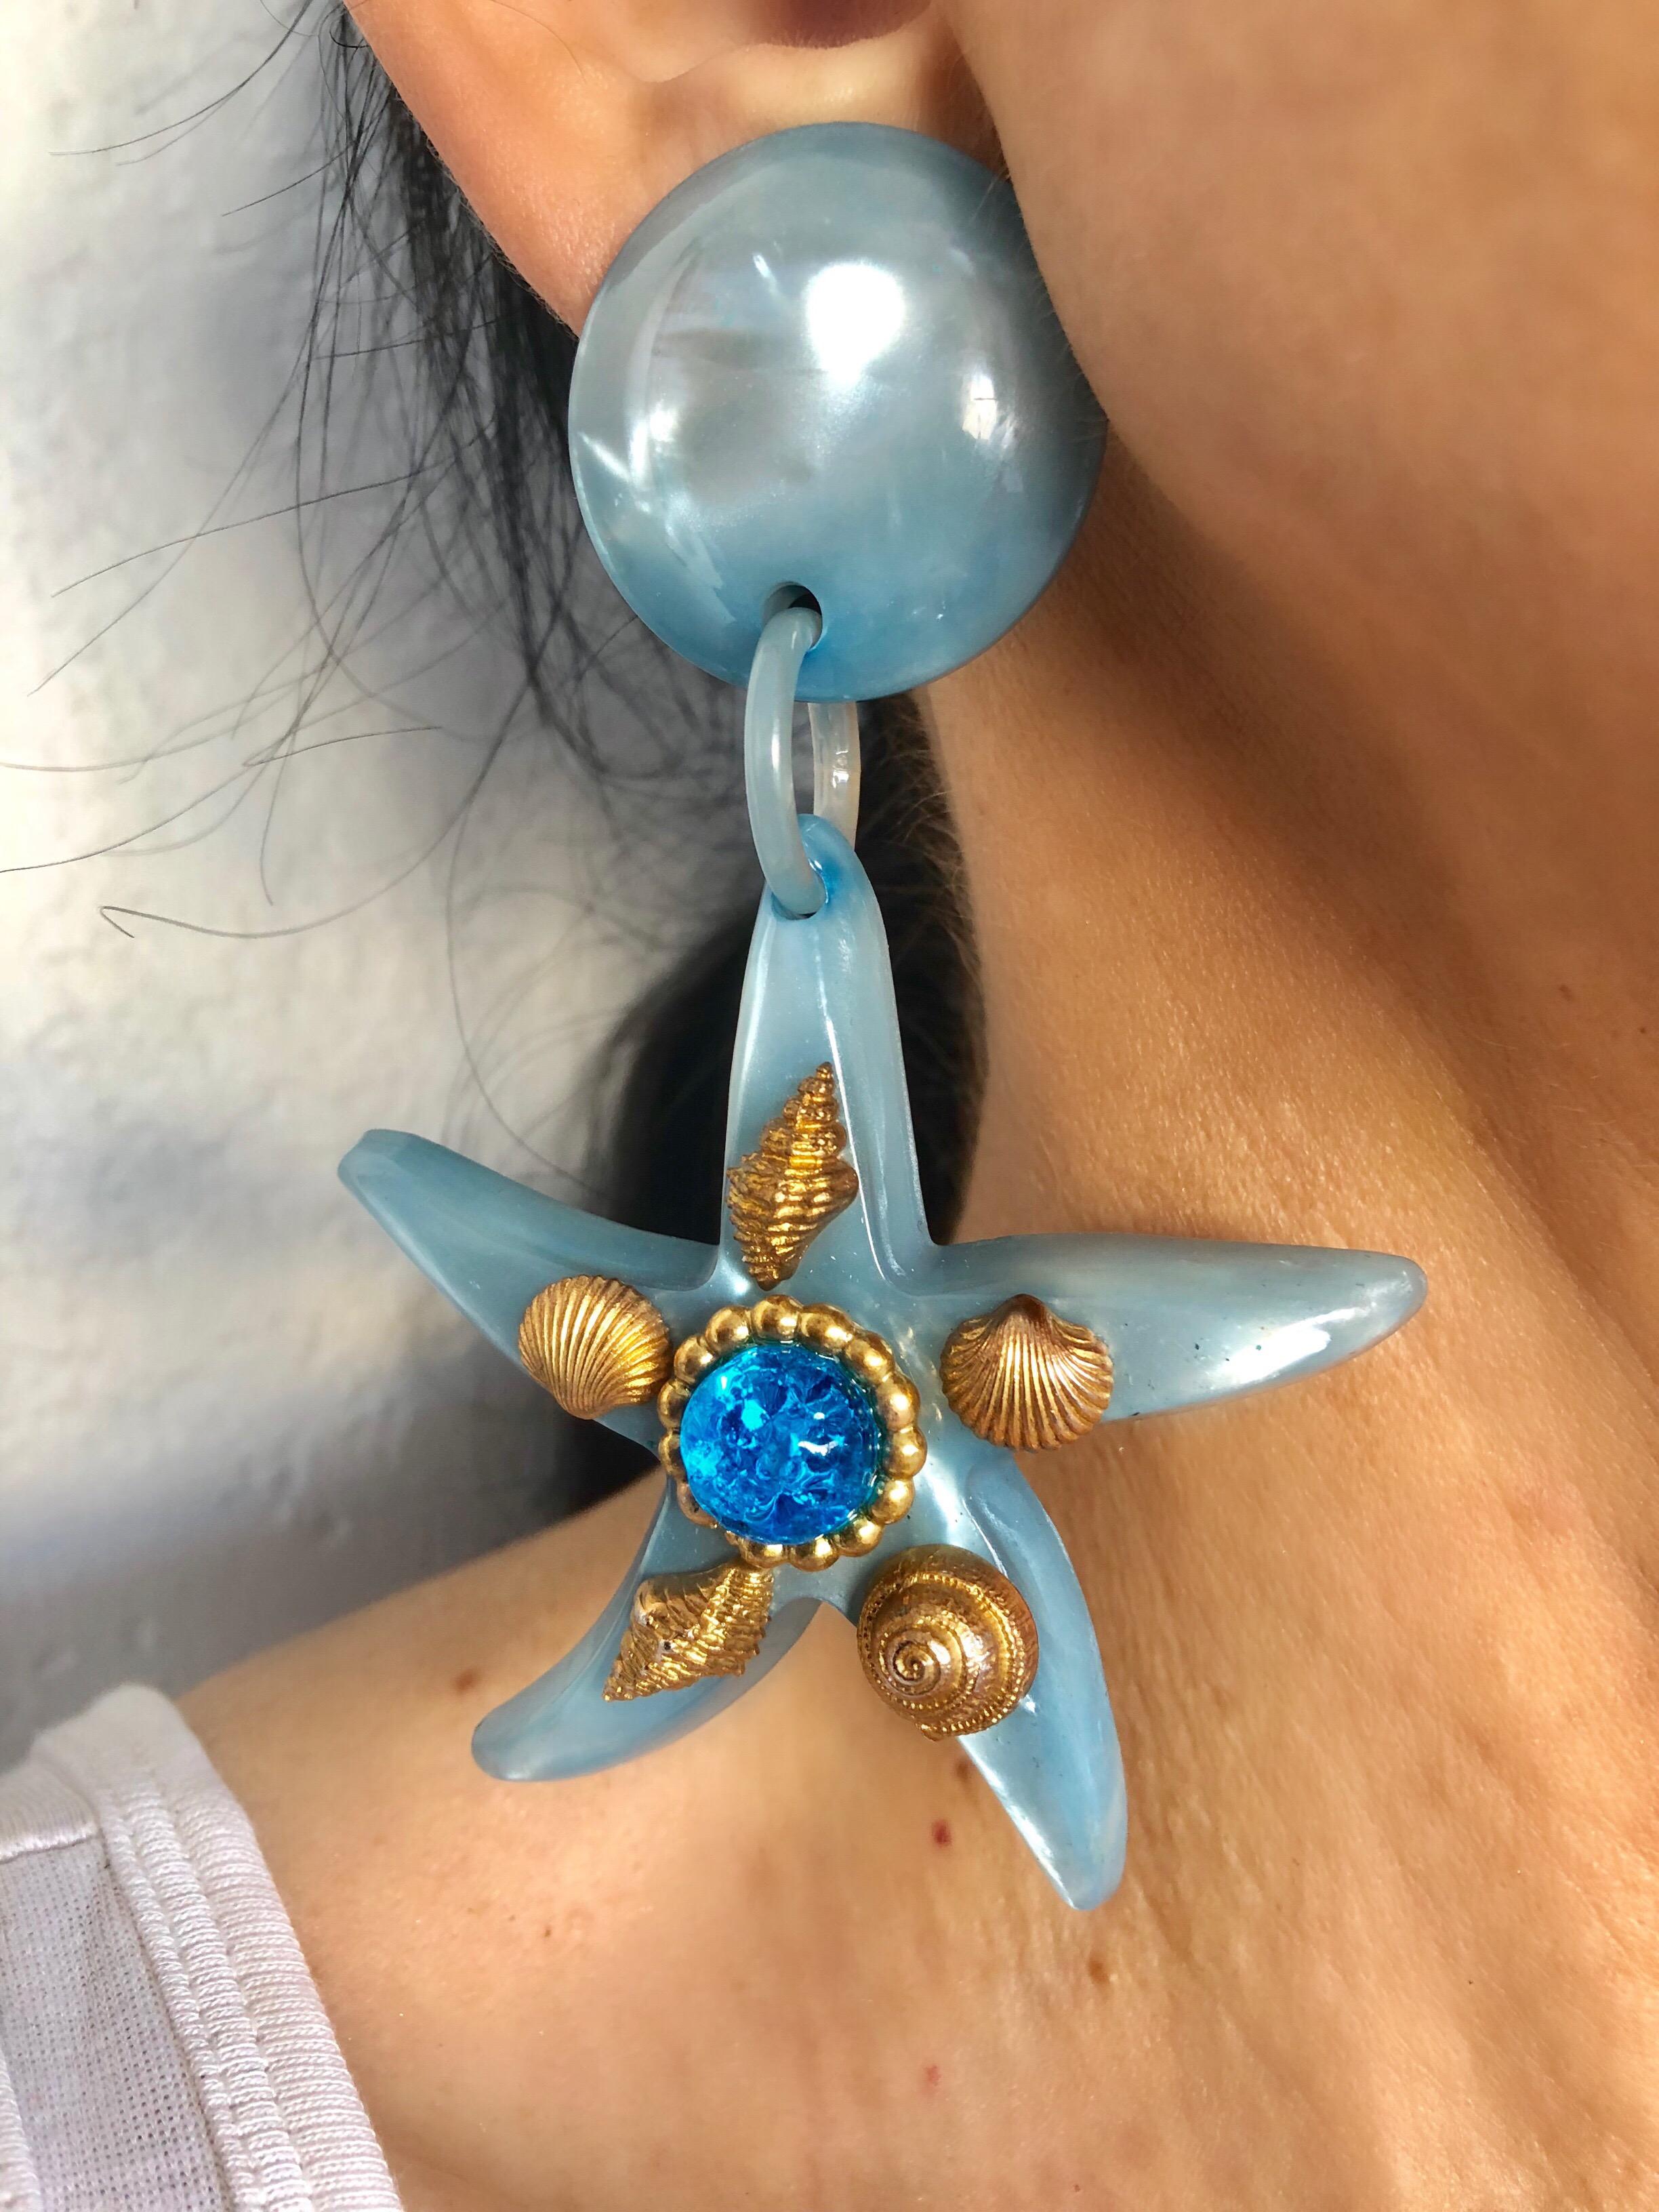 Monumental and scarce vintage pair of starfish statement clip-on earrings by Dominique Aurientis, Paris - made in Paris. The chic pair of earrings is comprised of a light-blue iridescent resin - which is adorned by gilt seashells and a large poured